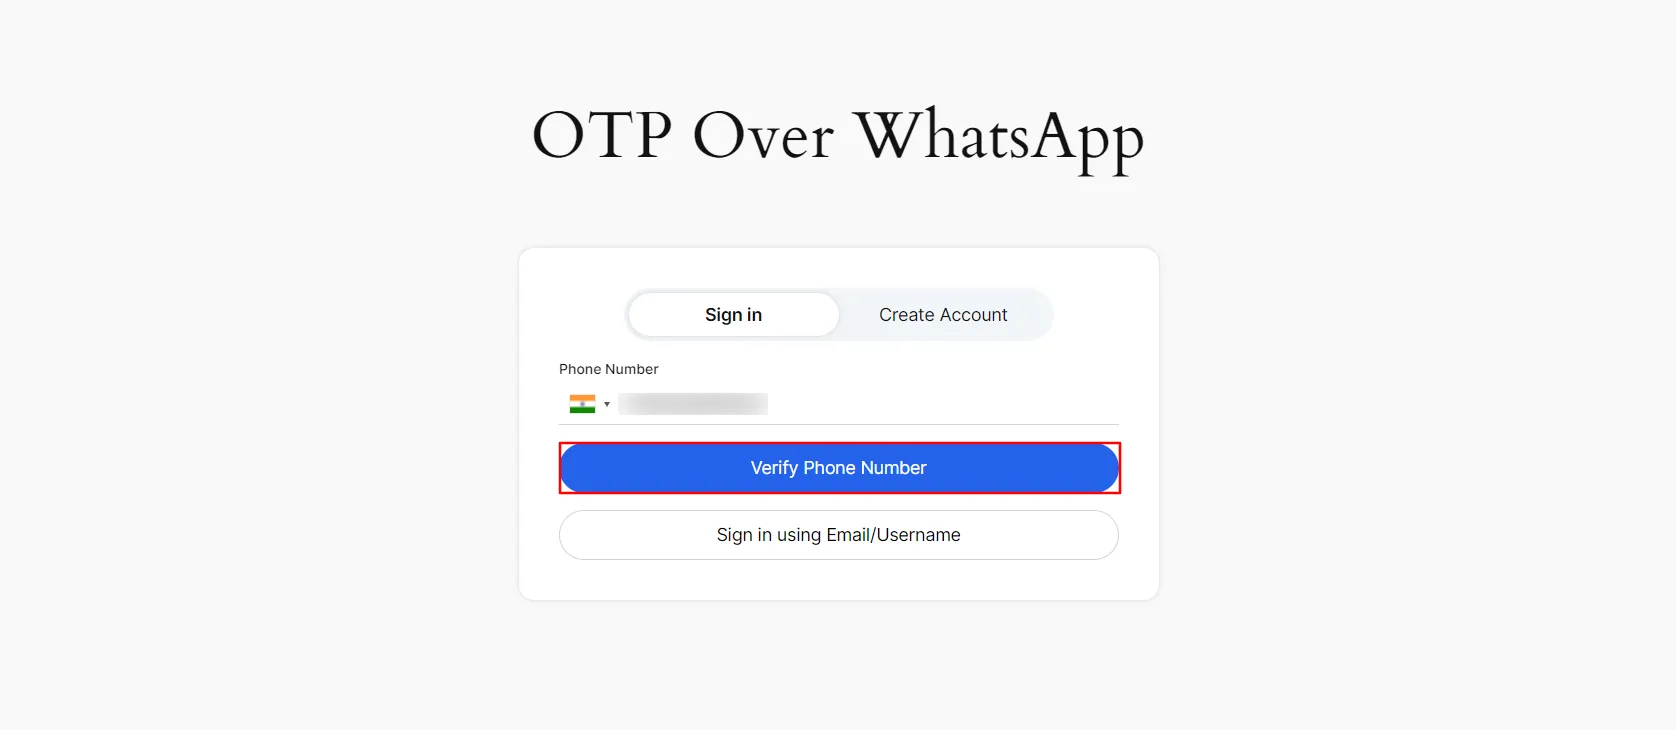 WhatsApp Login with OTP - Enter phone number